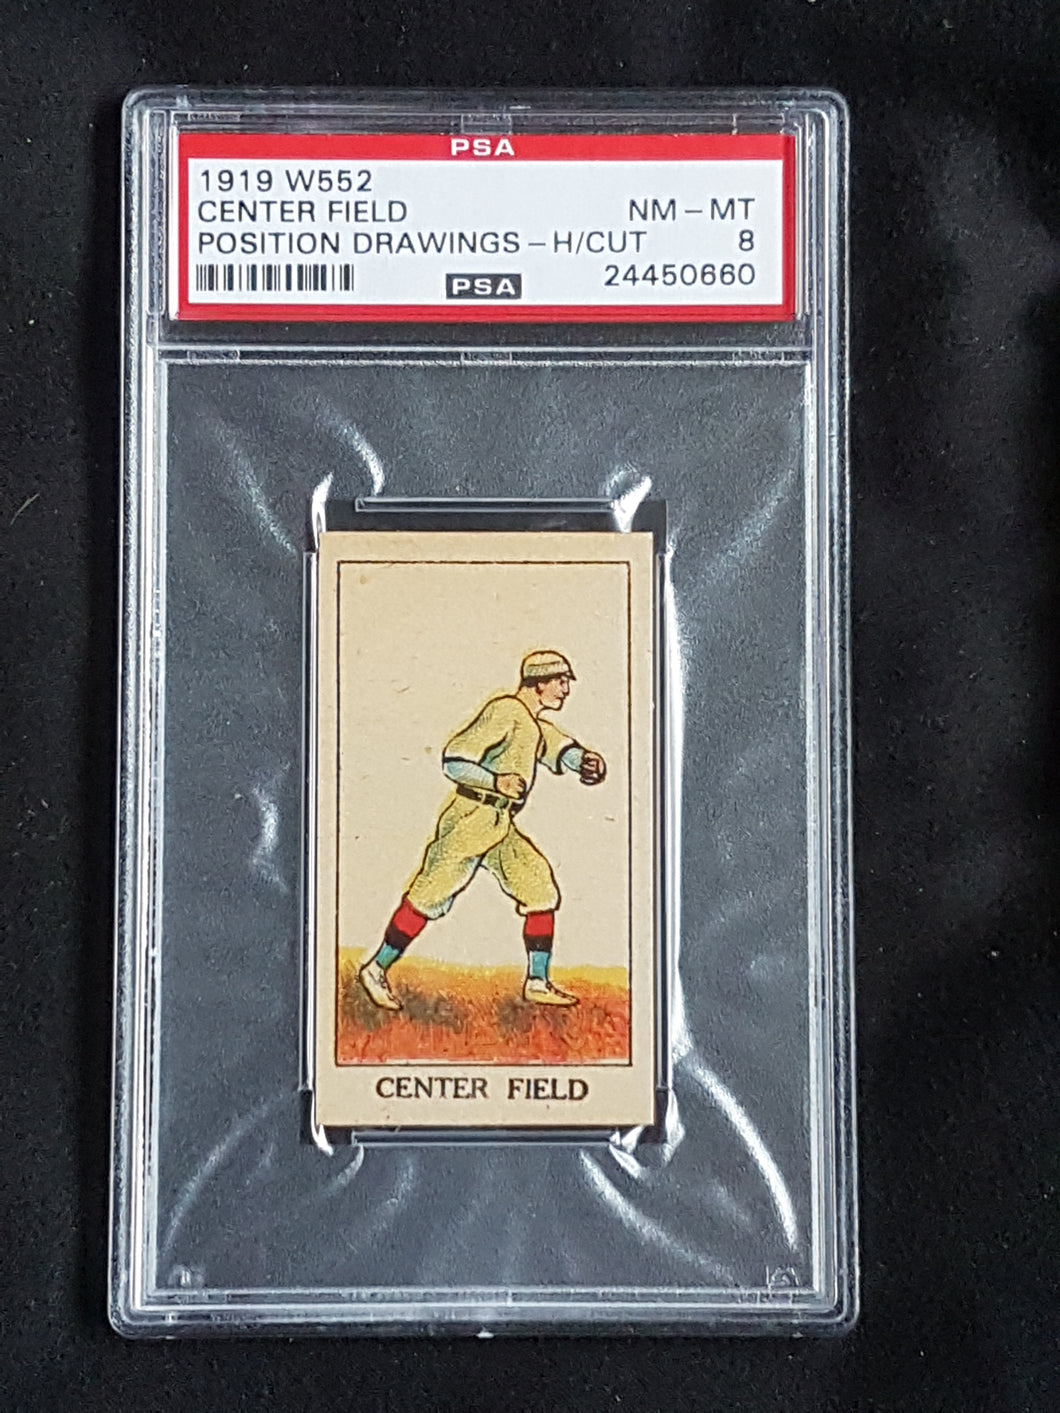 1919 W552 Hand Cut Position Drawings Pitcher PSA 8 POP 2 one higher